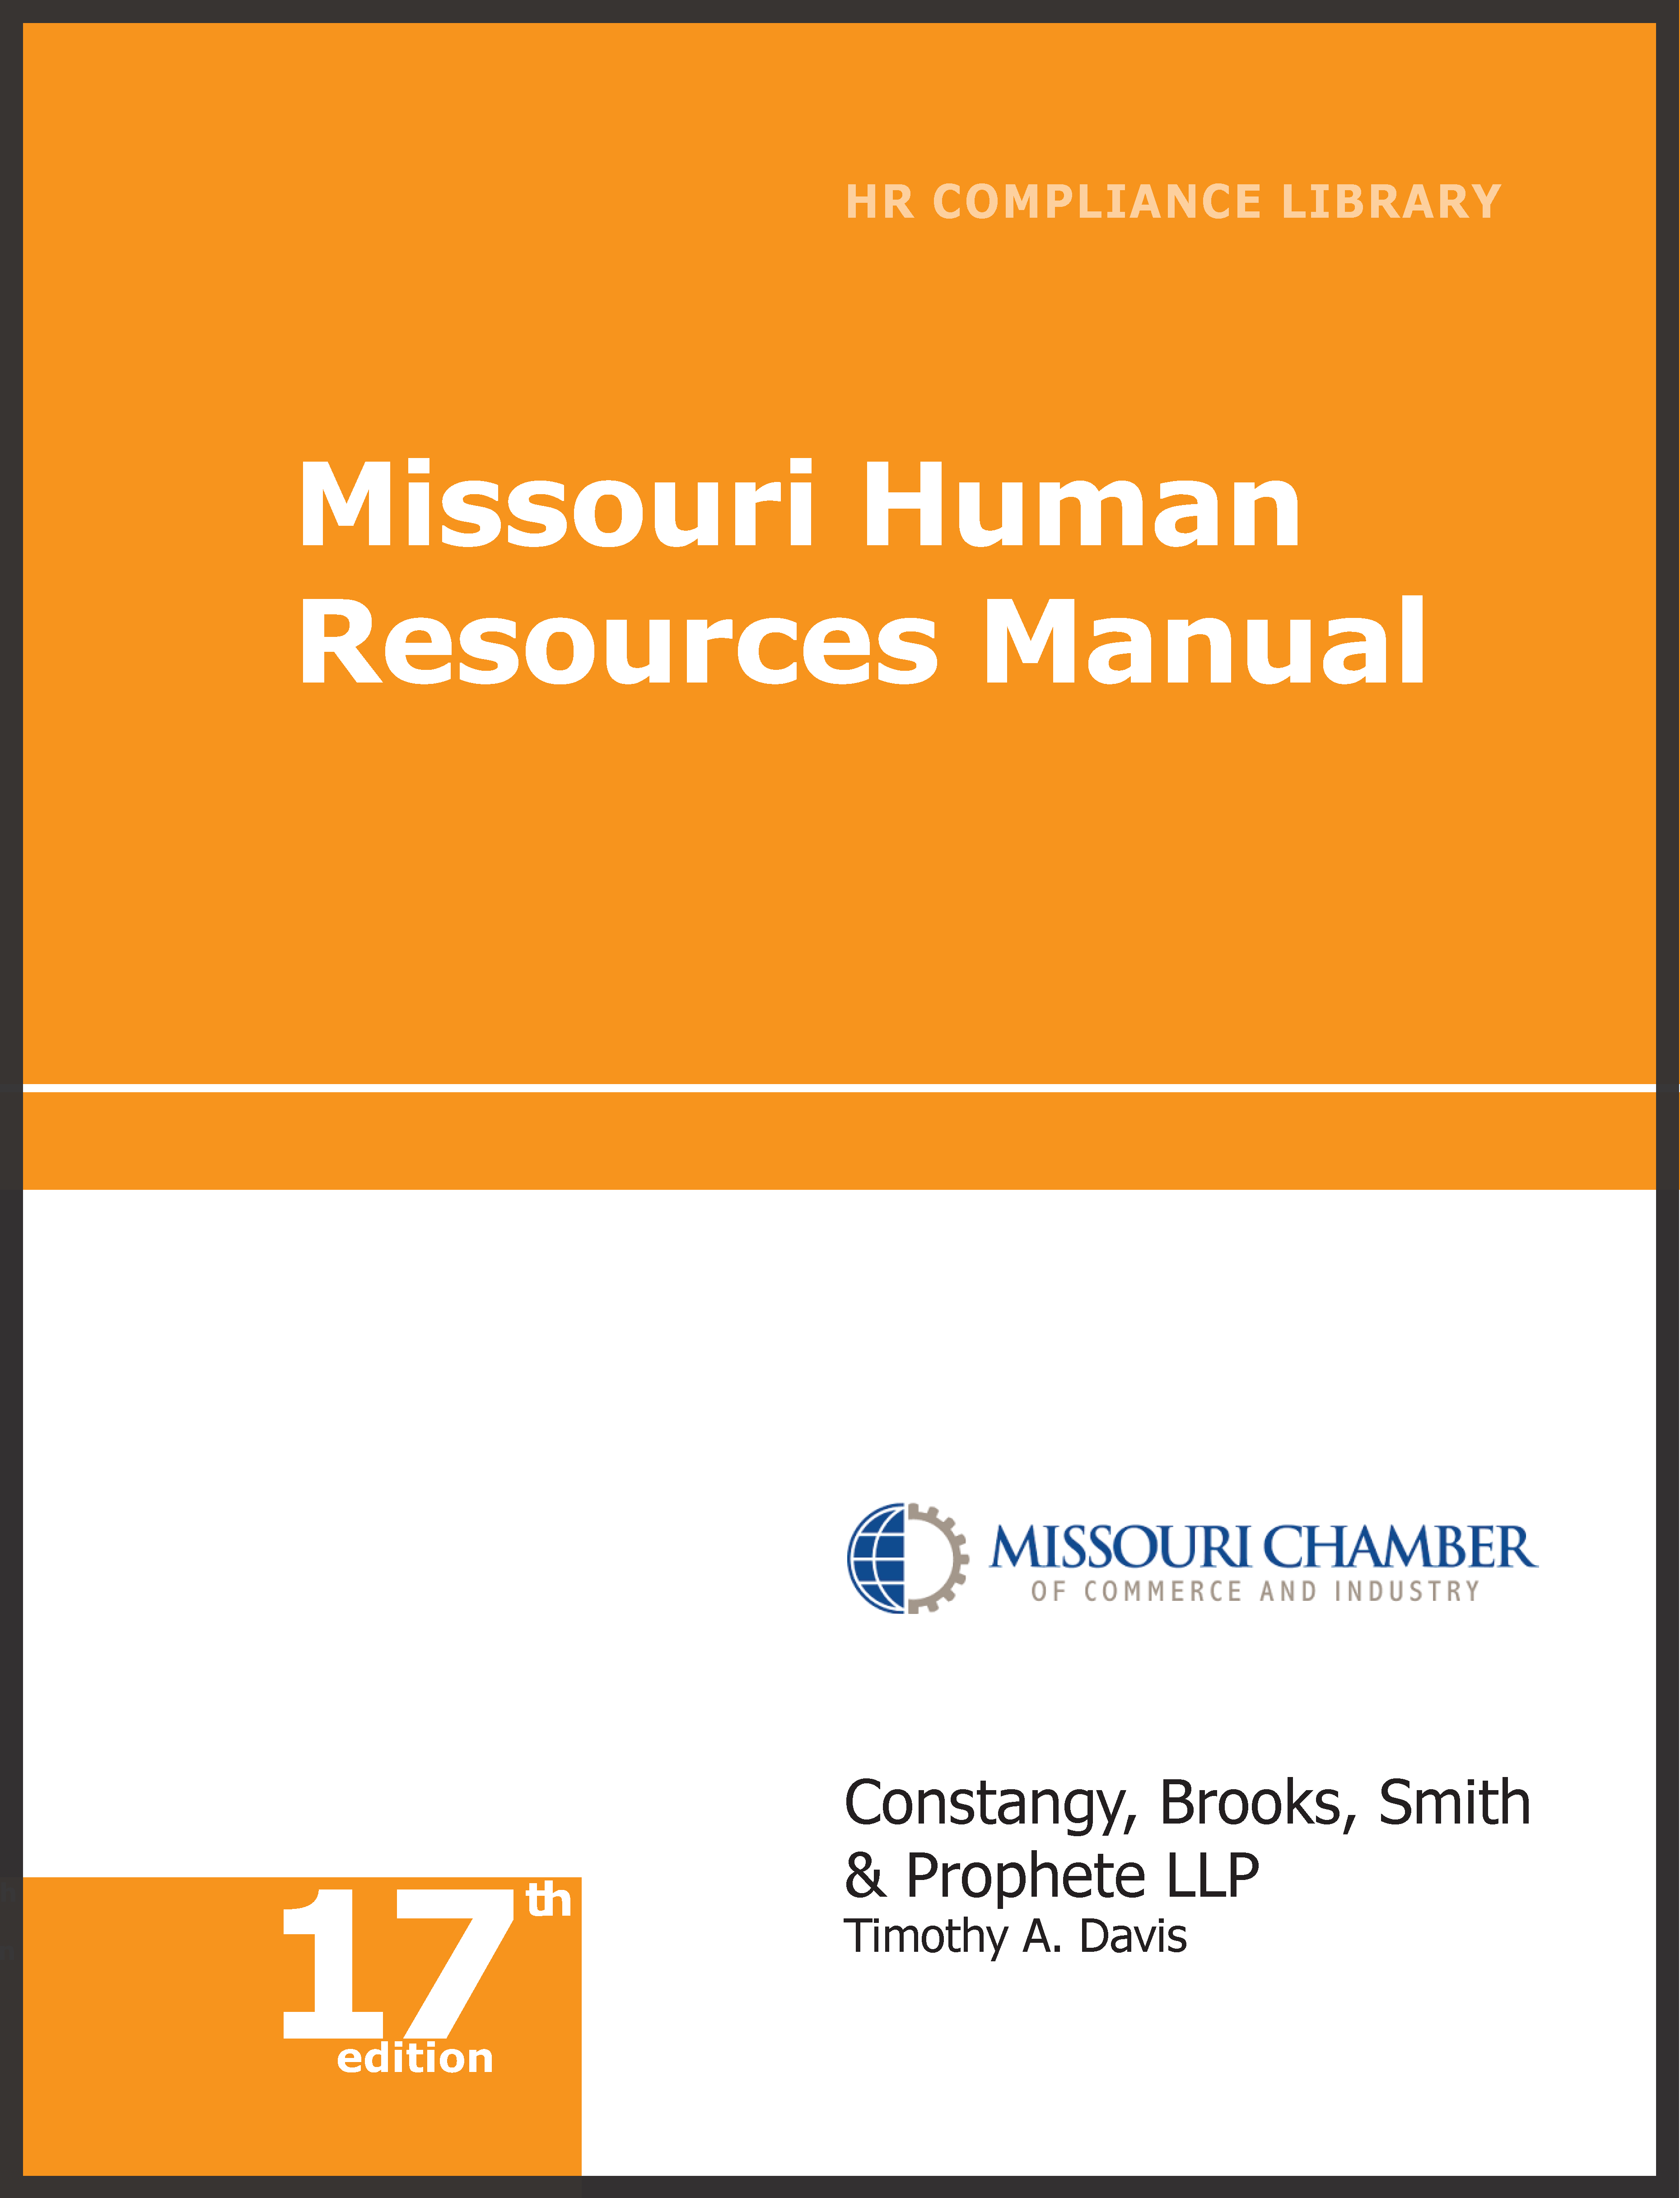 Missouri Human Resources Library—Online Only employment law image, remote work, labor laws, employment laws, right to work, order of protection, minimum wage